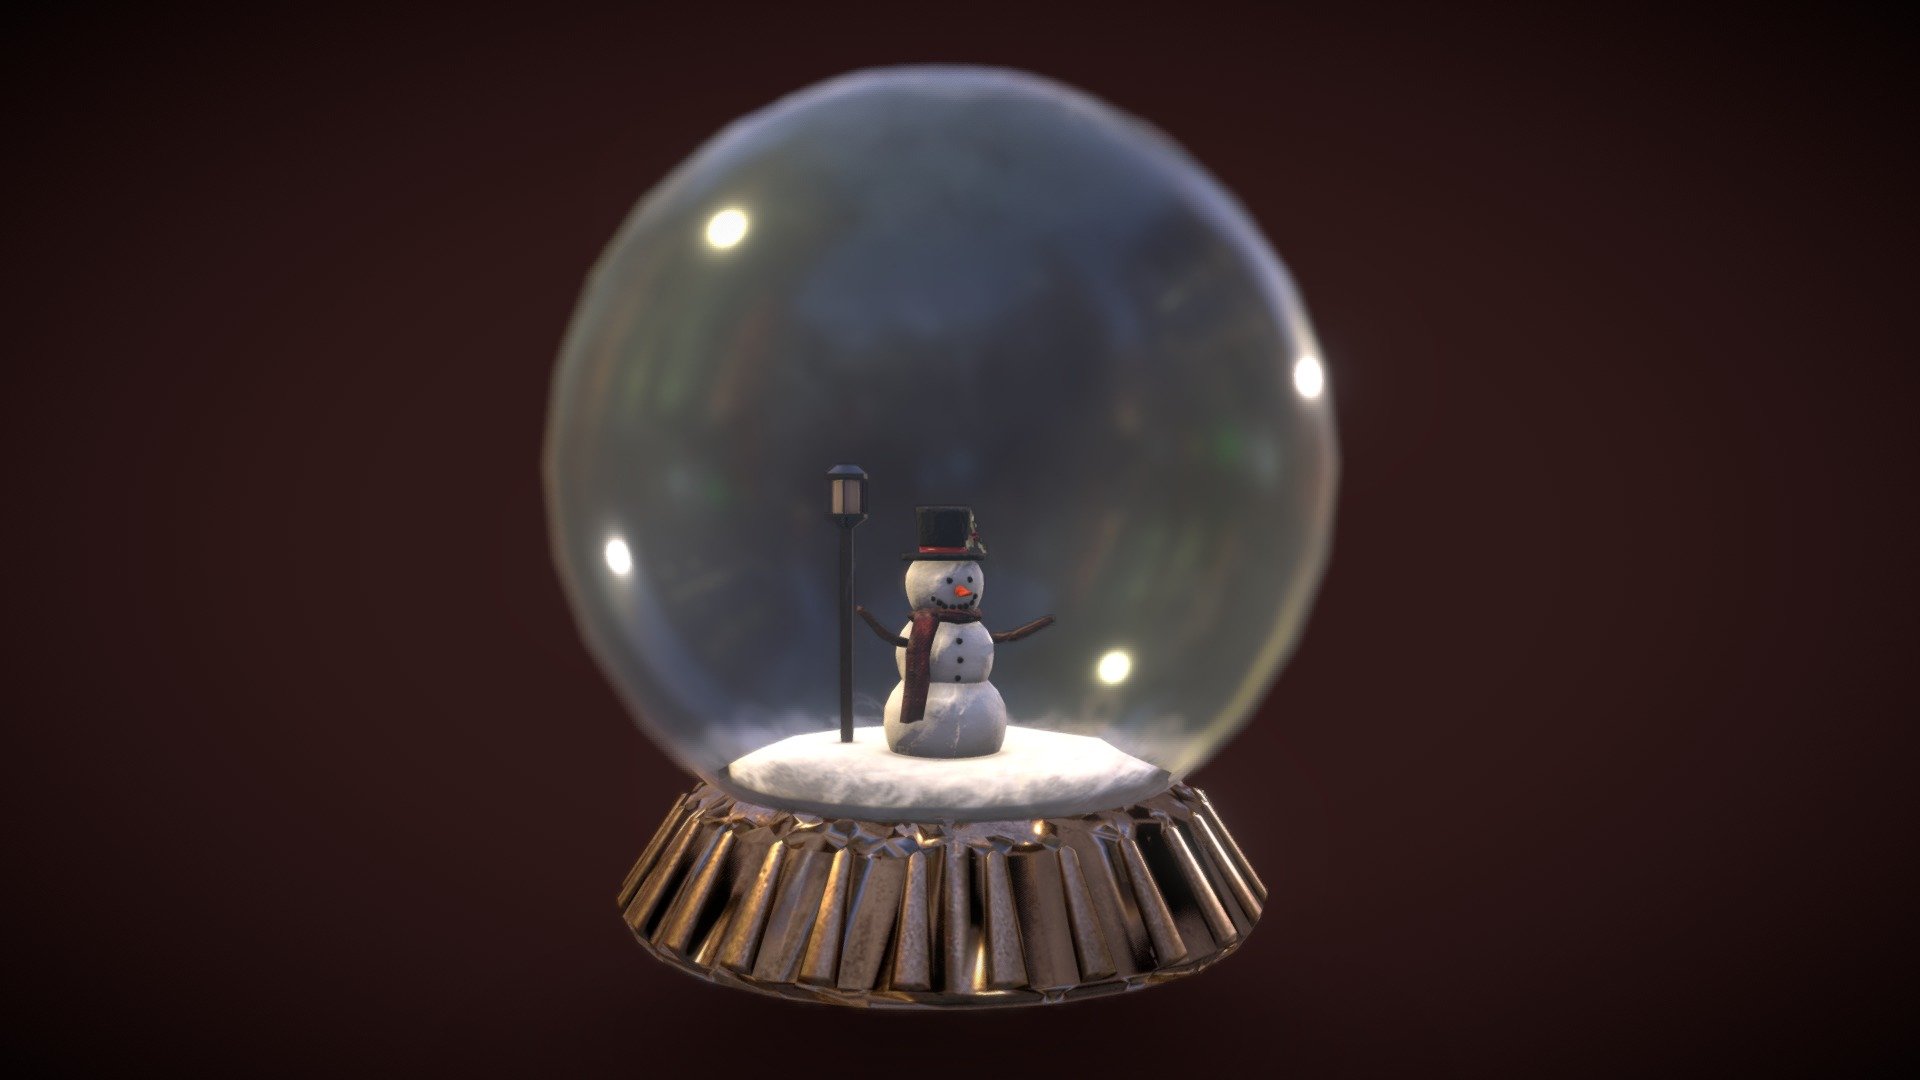 snow-globe-download-free-3d-model-by-kand8998-kaitlynandrus